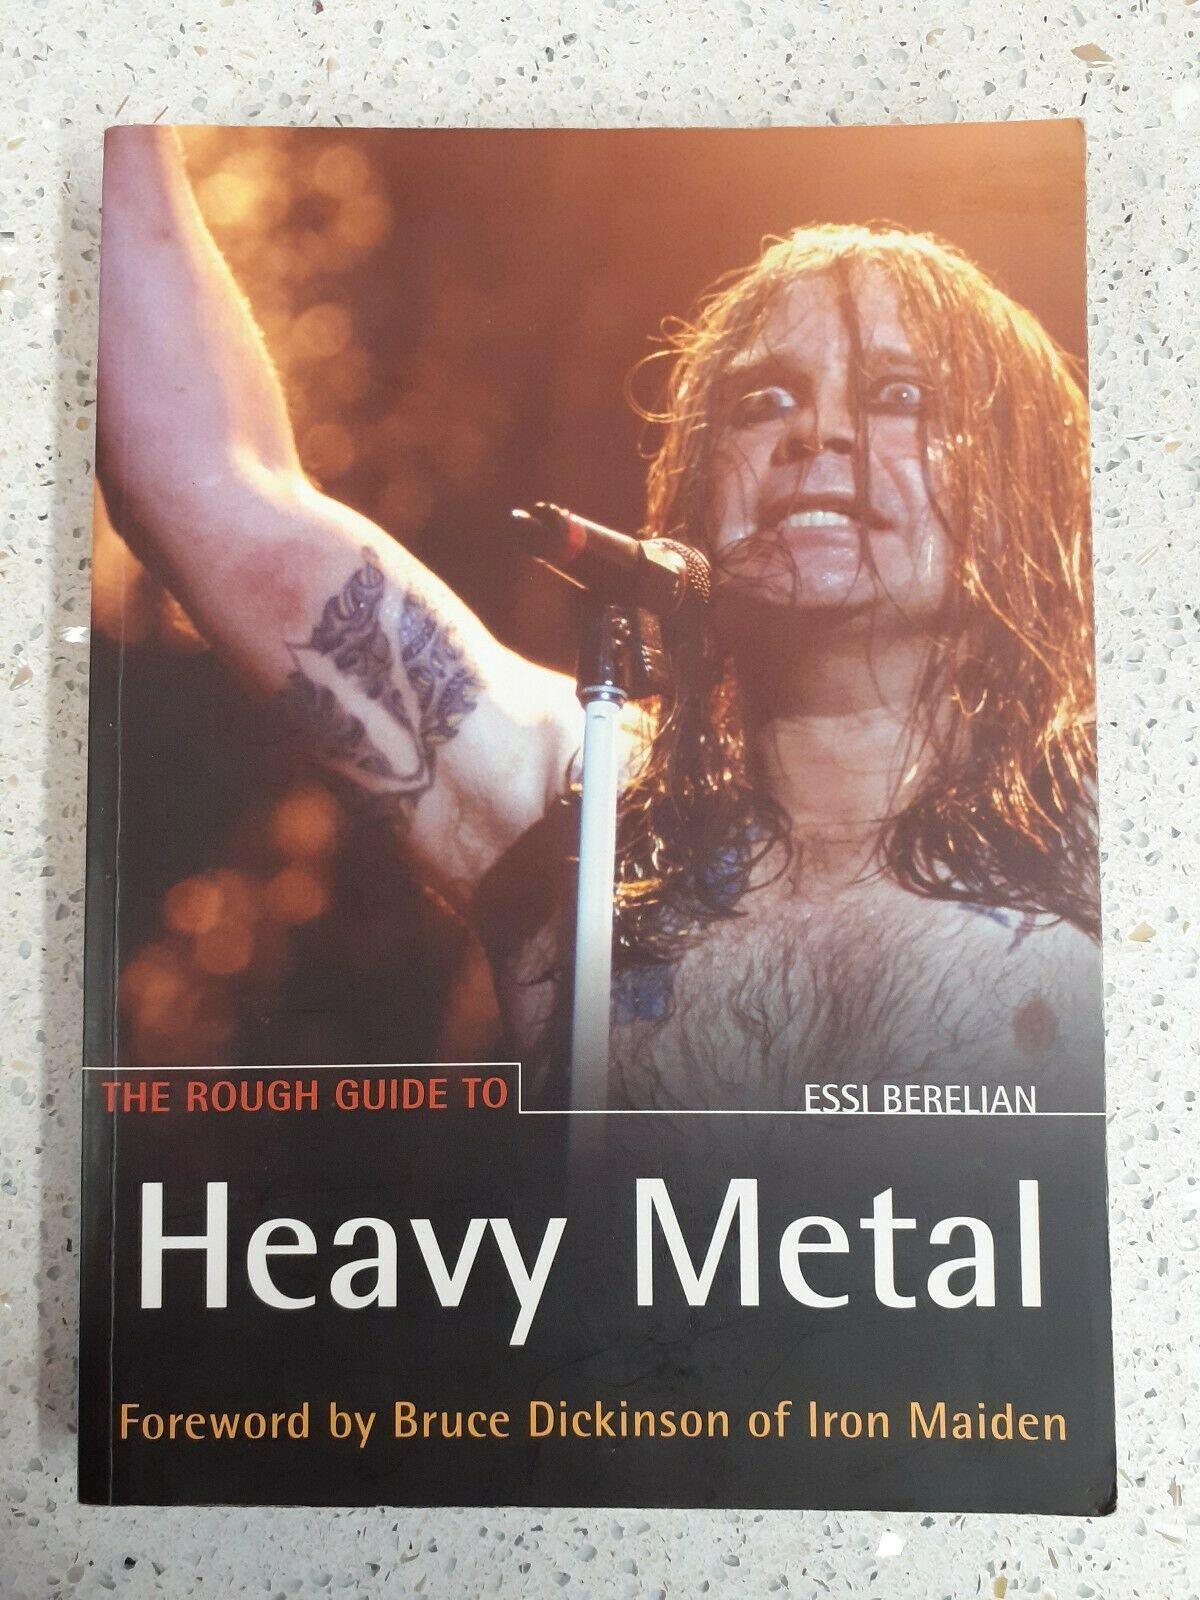 The rough guide to heavy metal by Essi Berelian (Paperback) - DD Music Geek